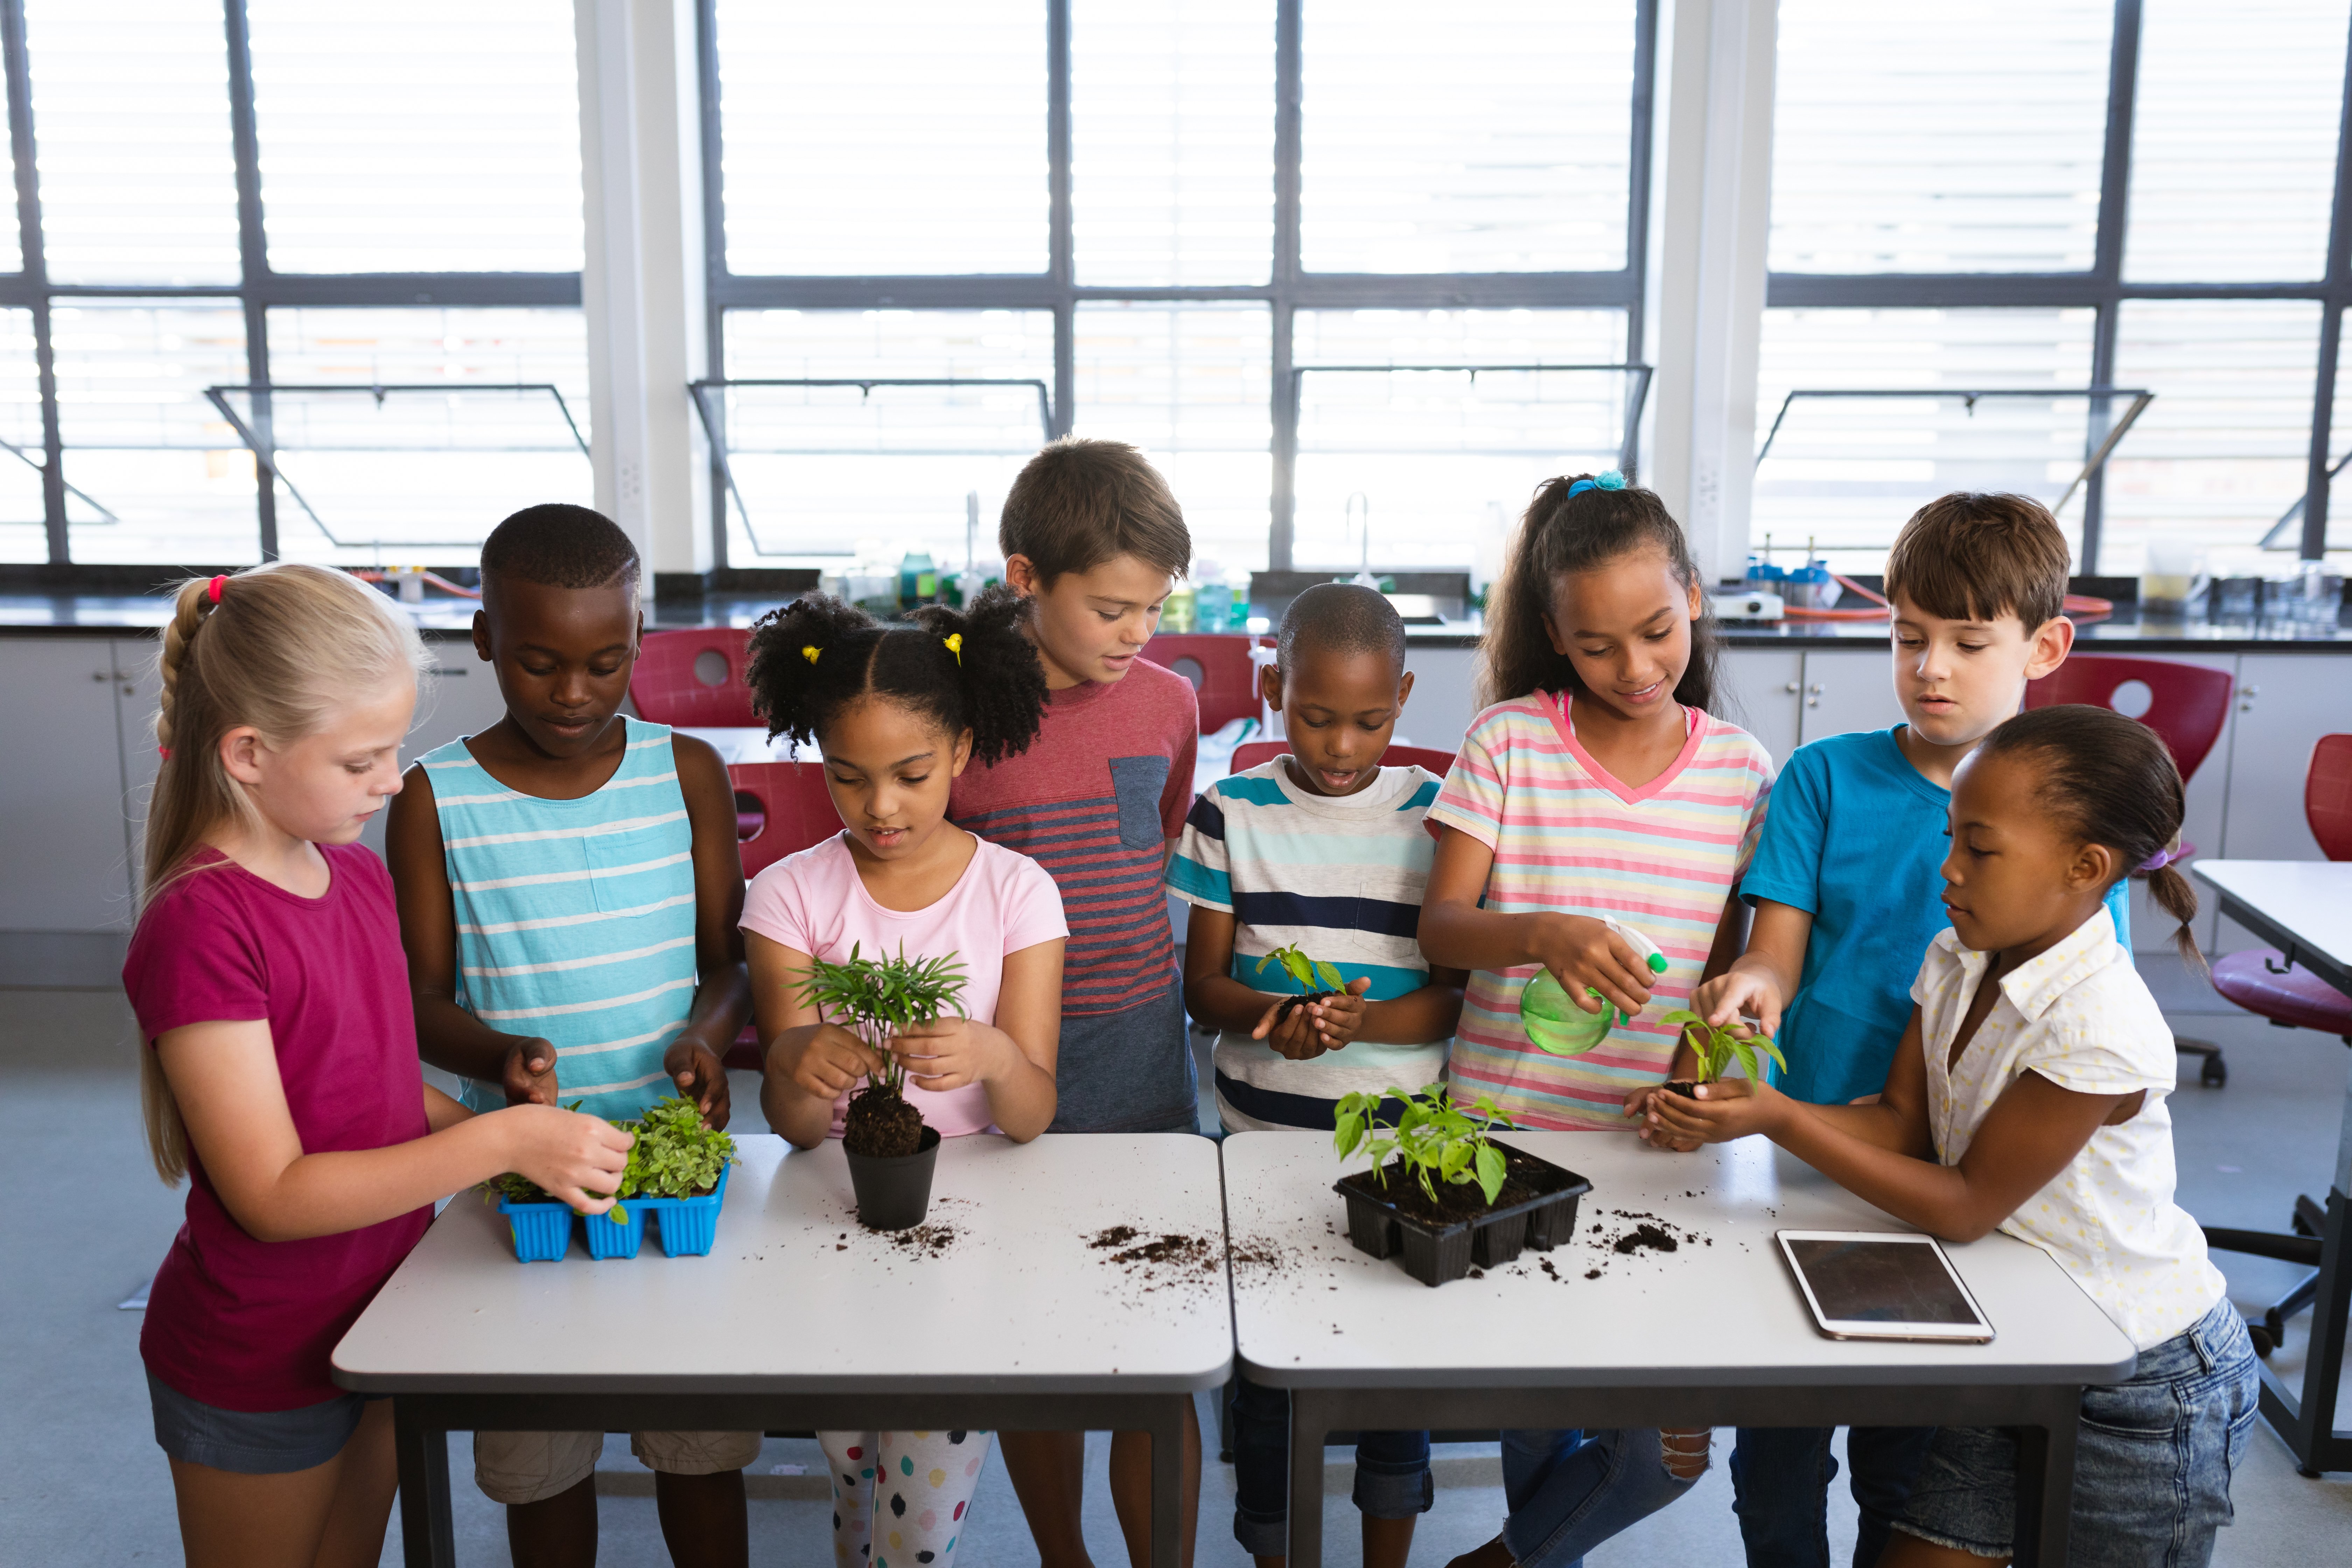 How to Use Cooperative Learning Strategies in STEM